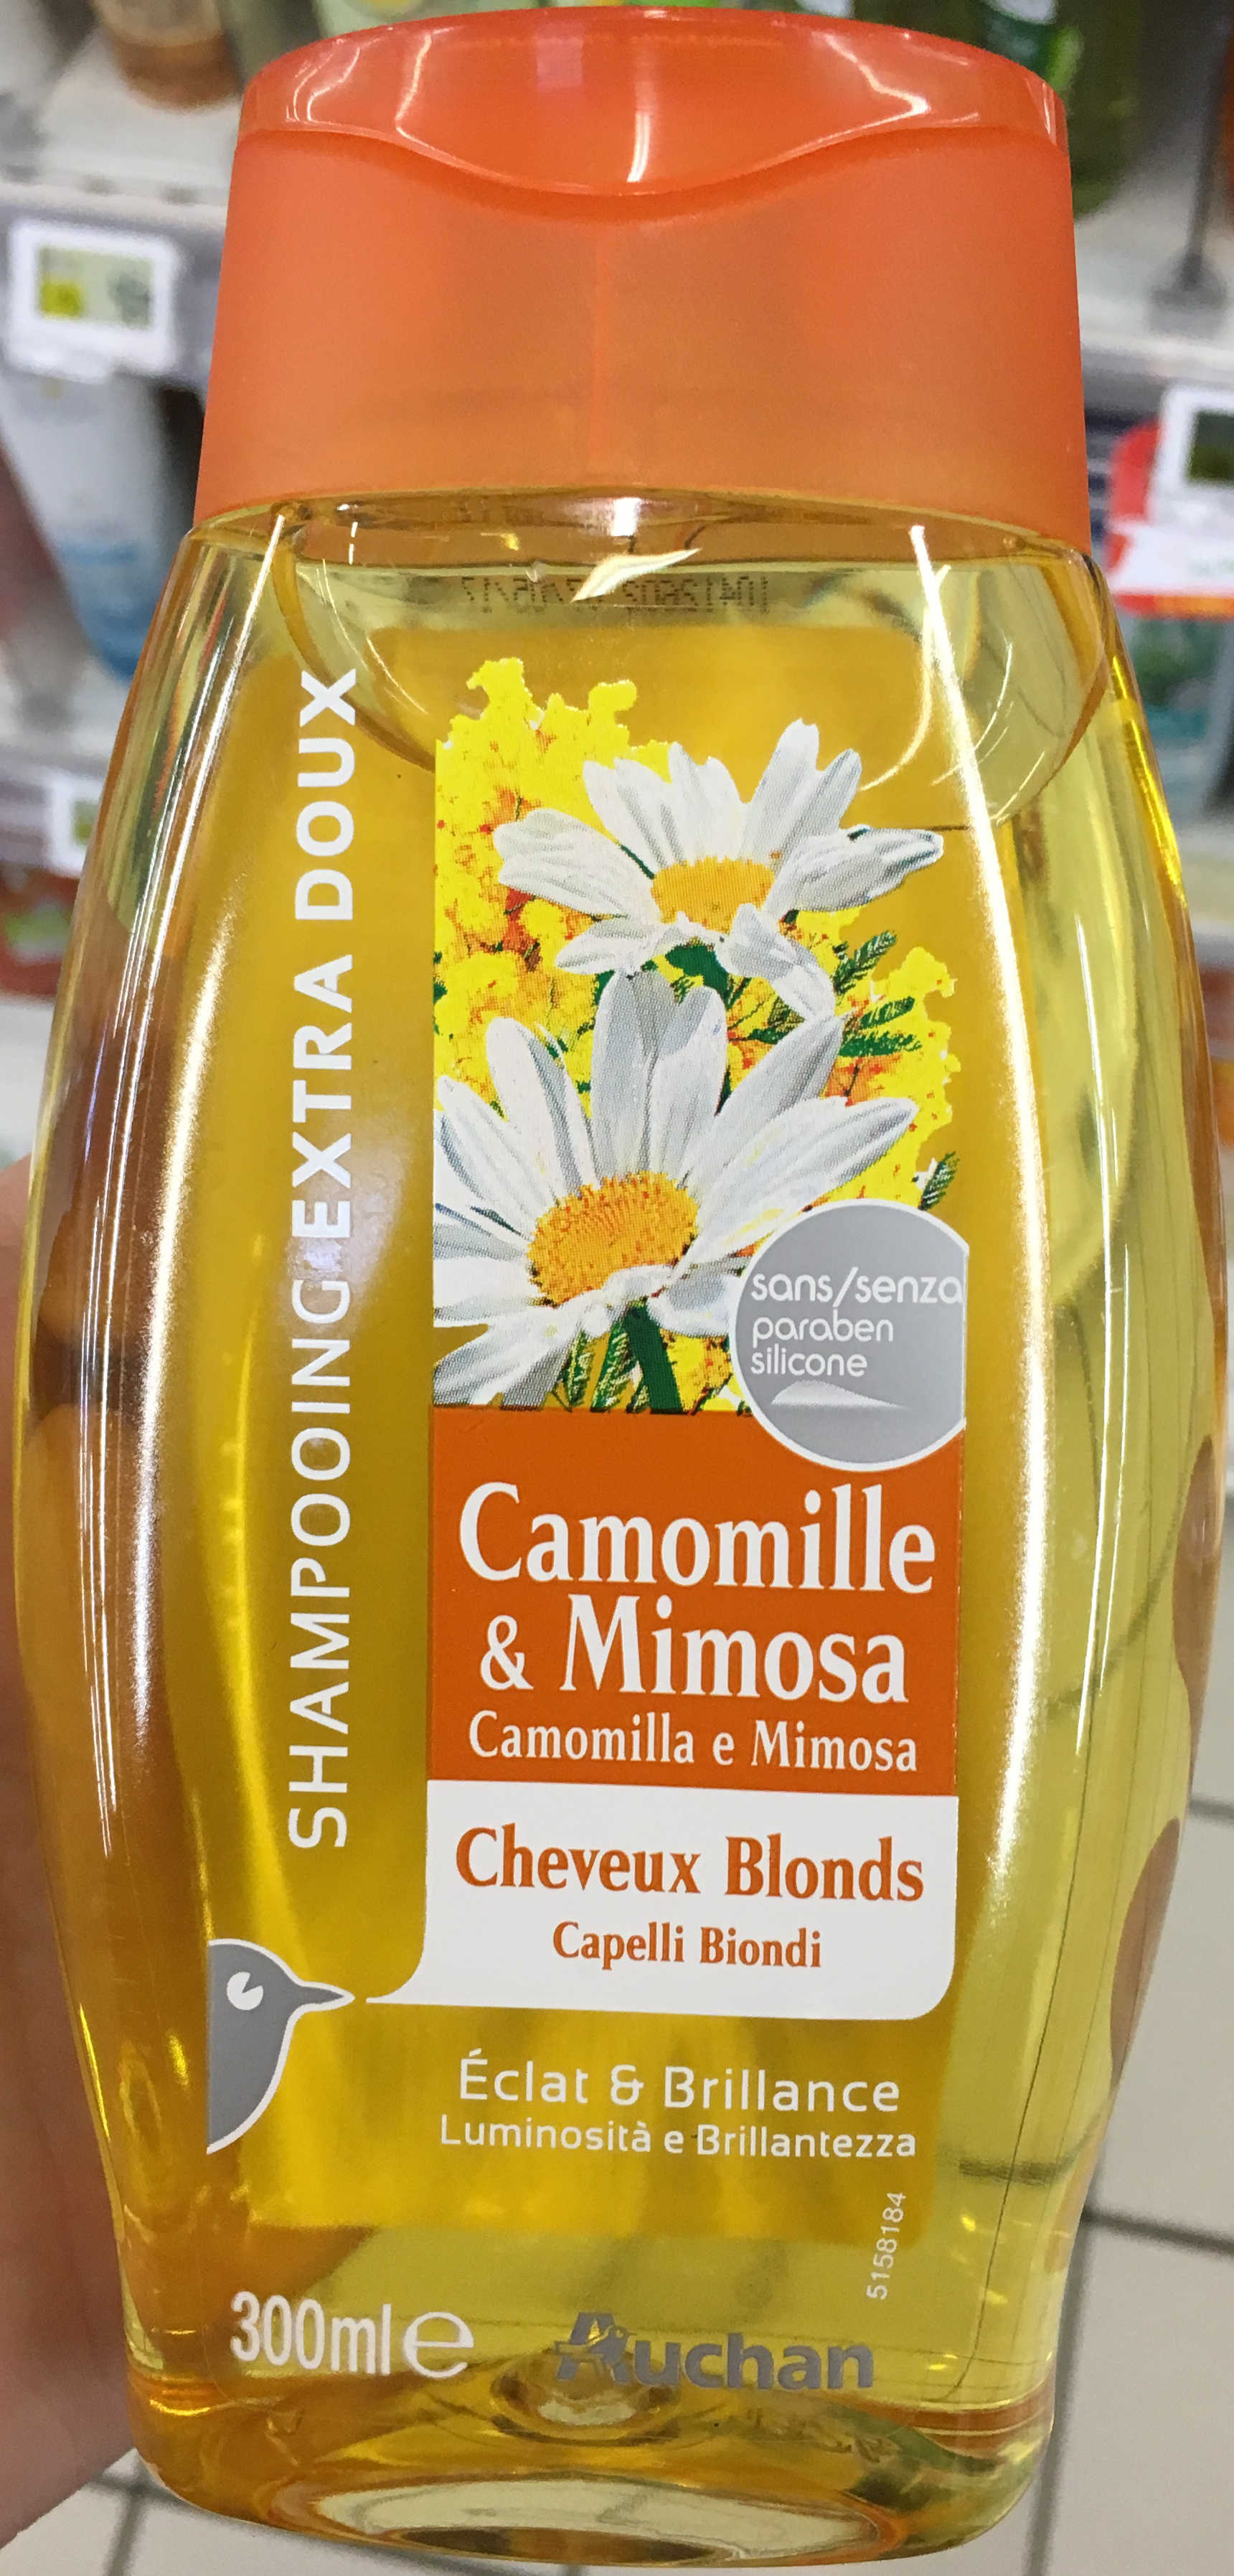 Shampooing extra-doux Camomille & Mimosa - Product - fr